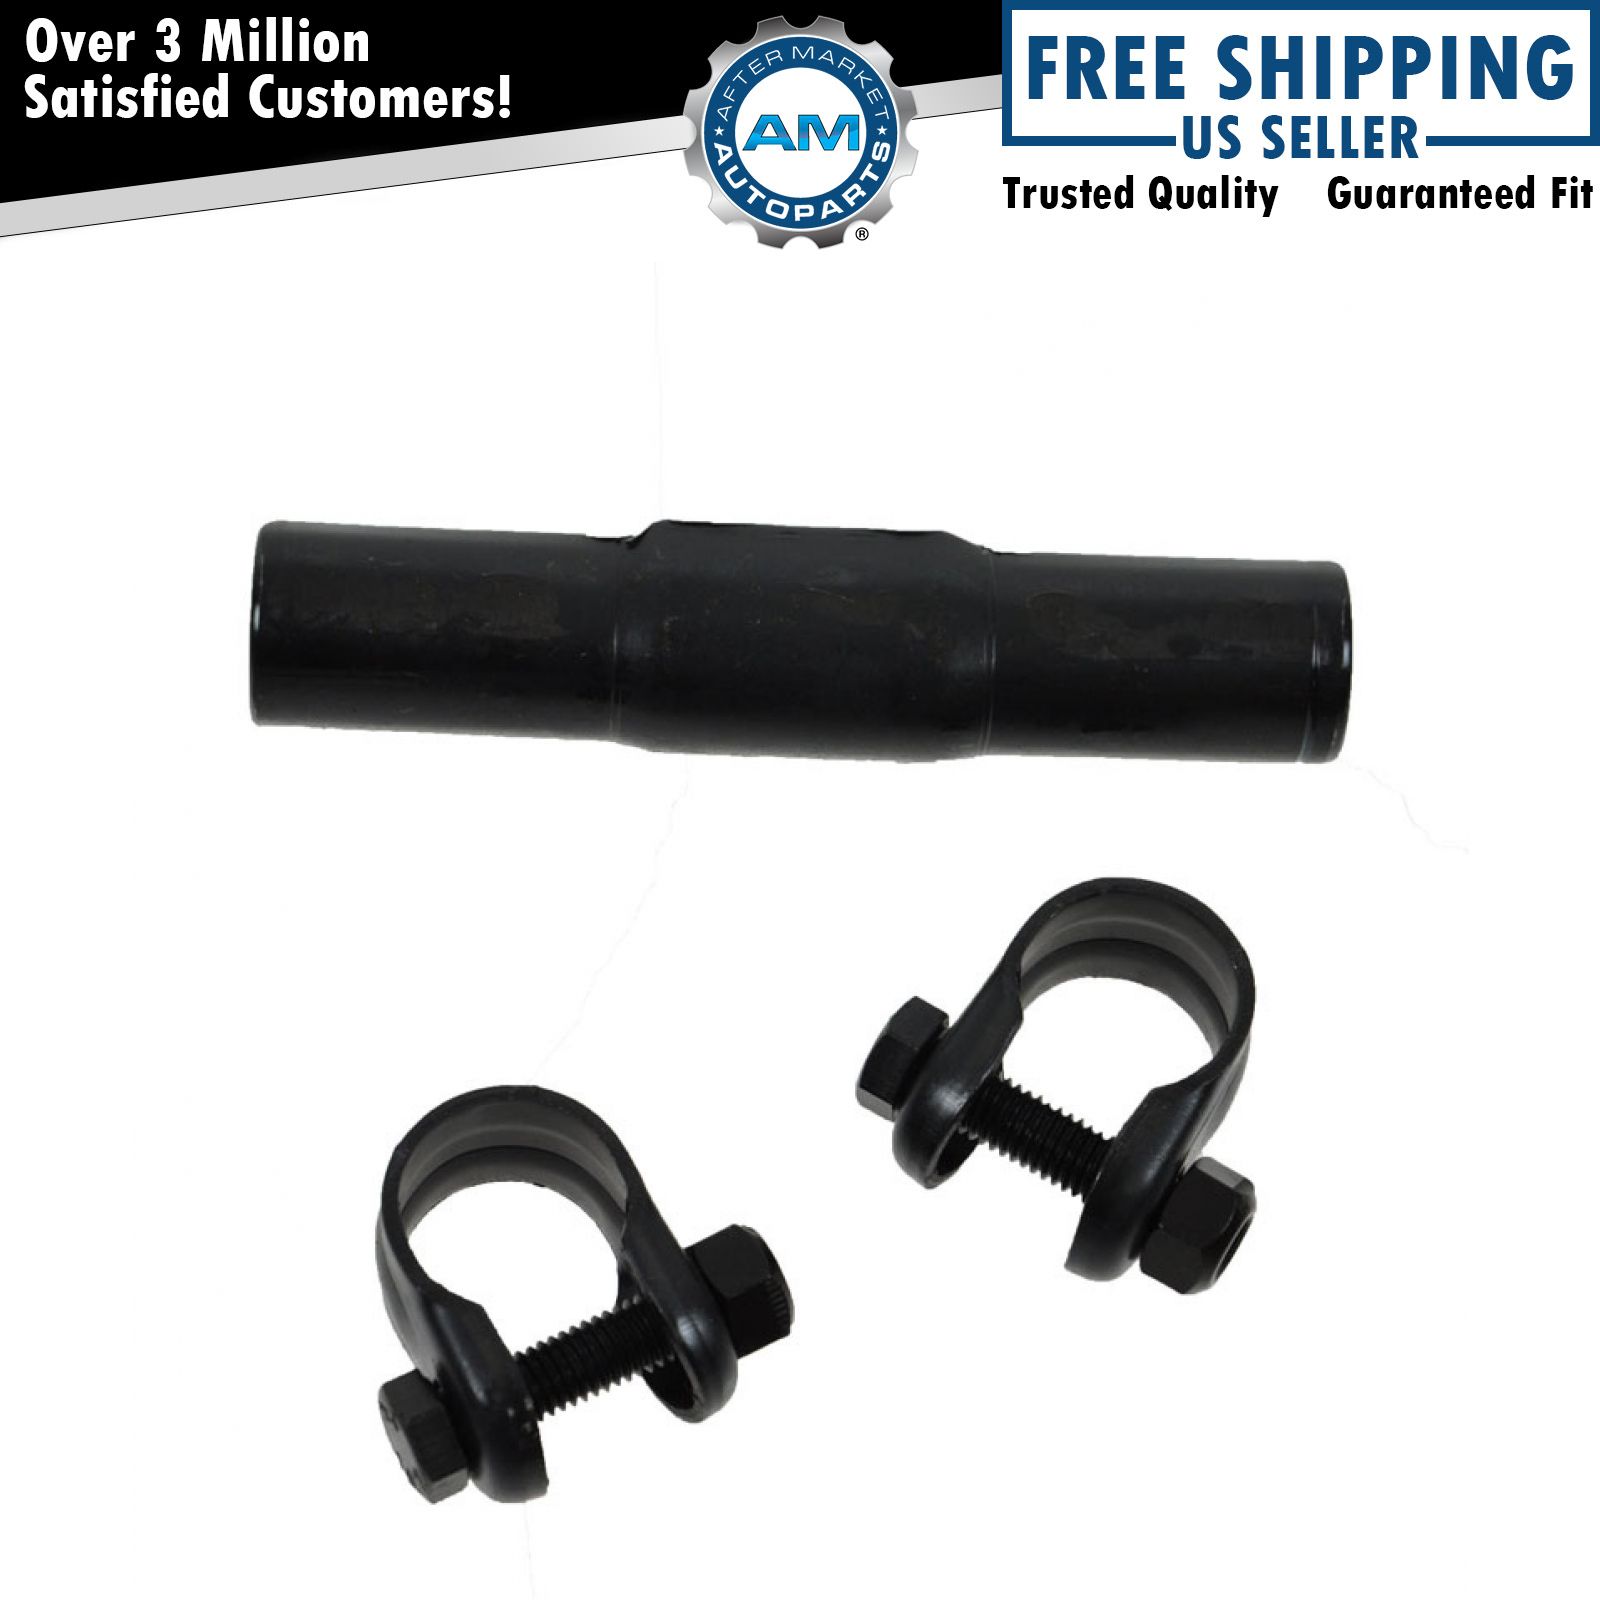 AC DELCO 45A6004 Tie Rod Adjusting Sleeve for GM Dodge Ford Chevy Buick Cadillac